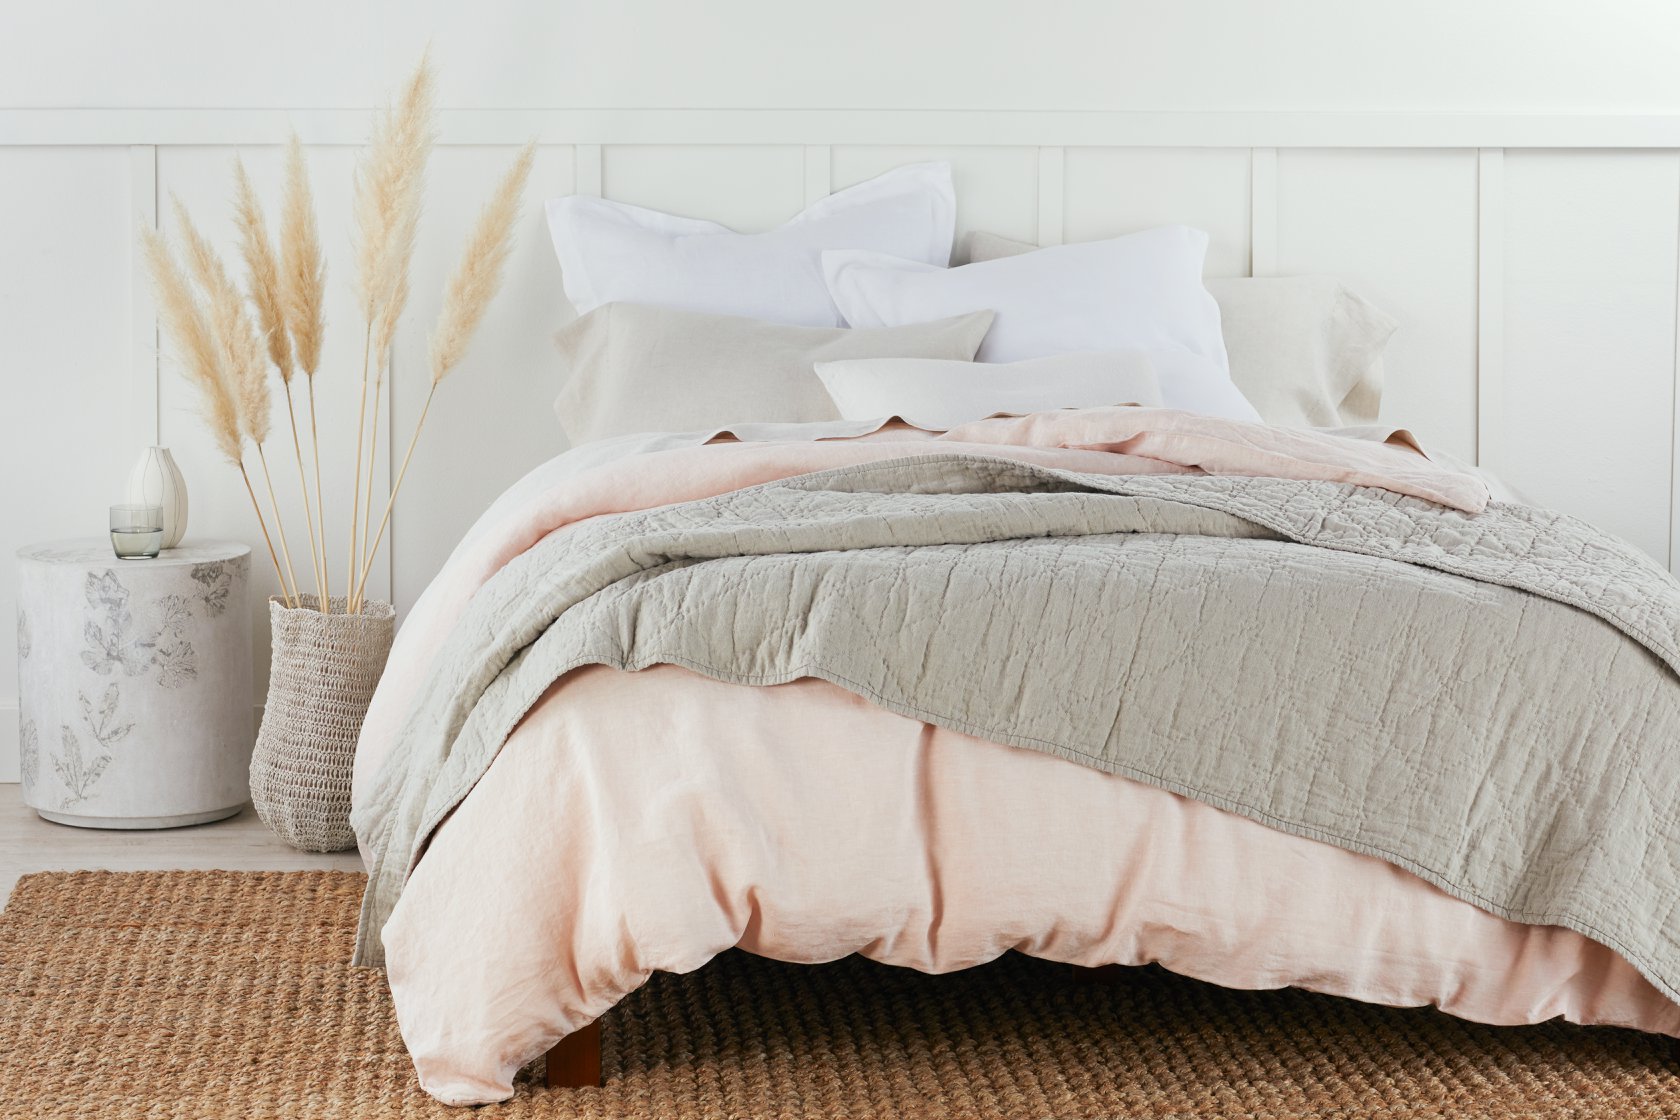 Why are organic cotton bed linen so popular?